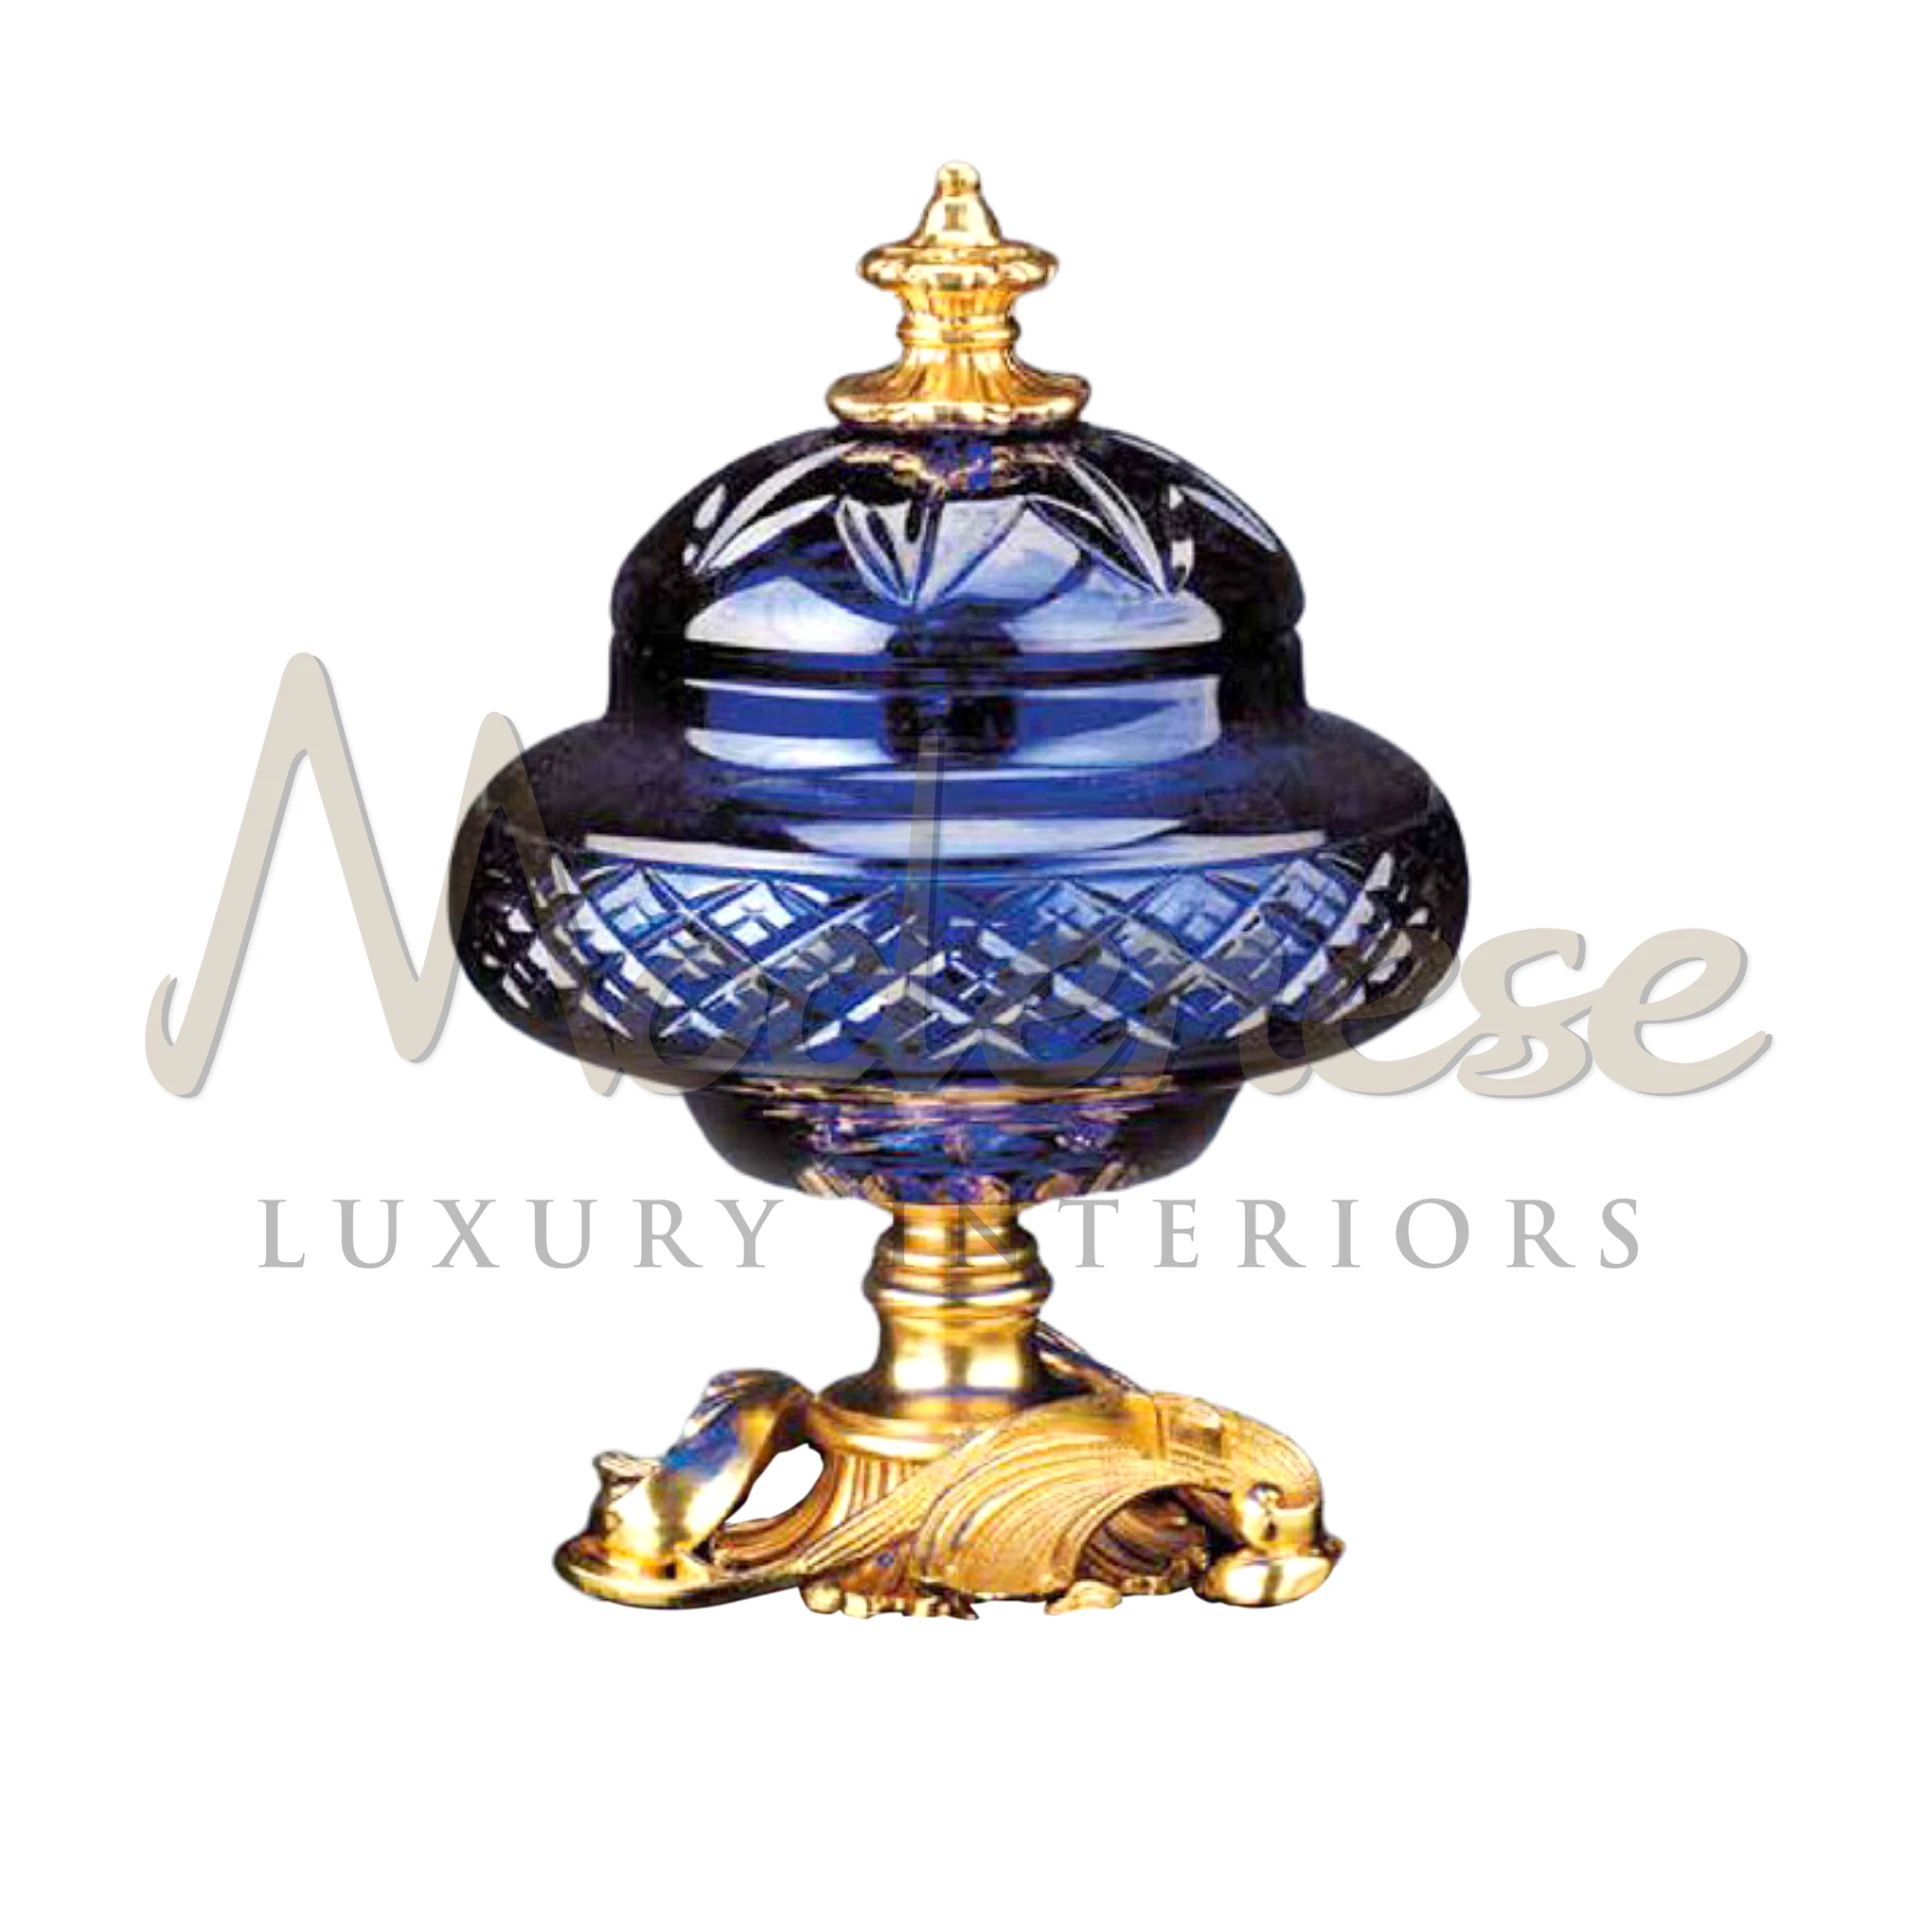 Classical Royal Blue Box in wood, metal, or glass, exuding grandeur and opulence, a perfect addition to luxury interiors with a taste for classic and baroque styles.






